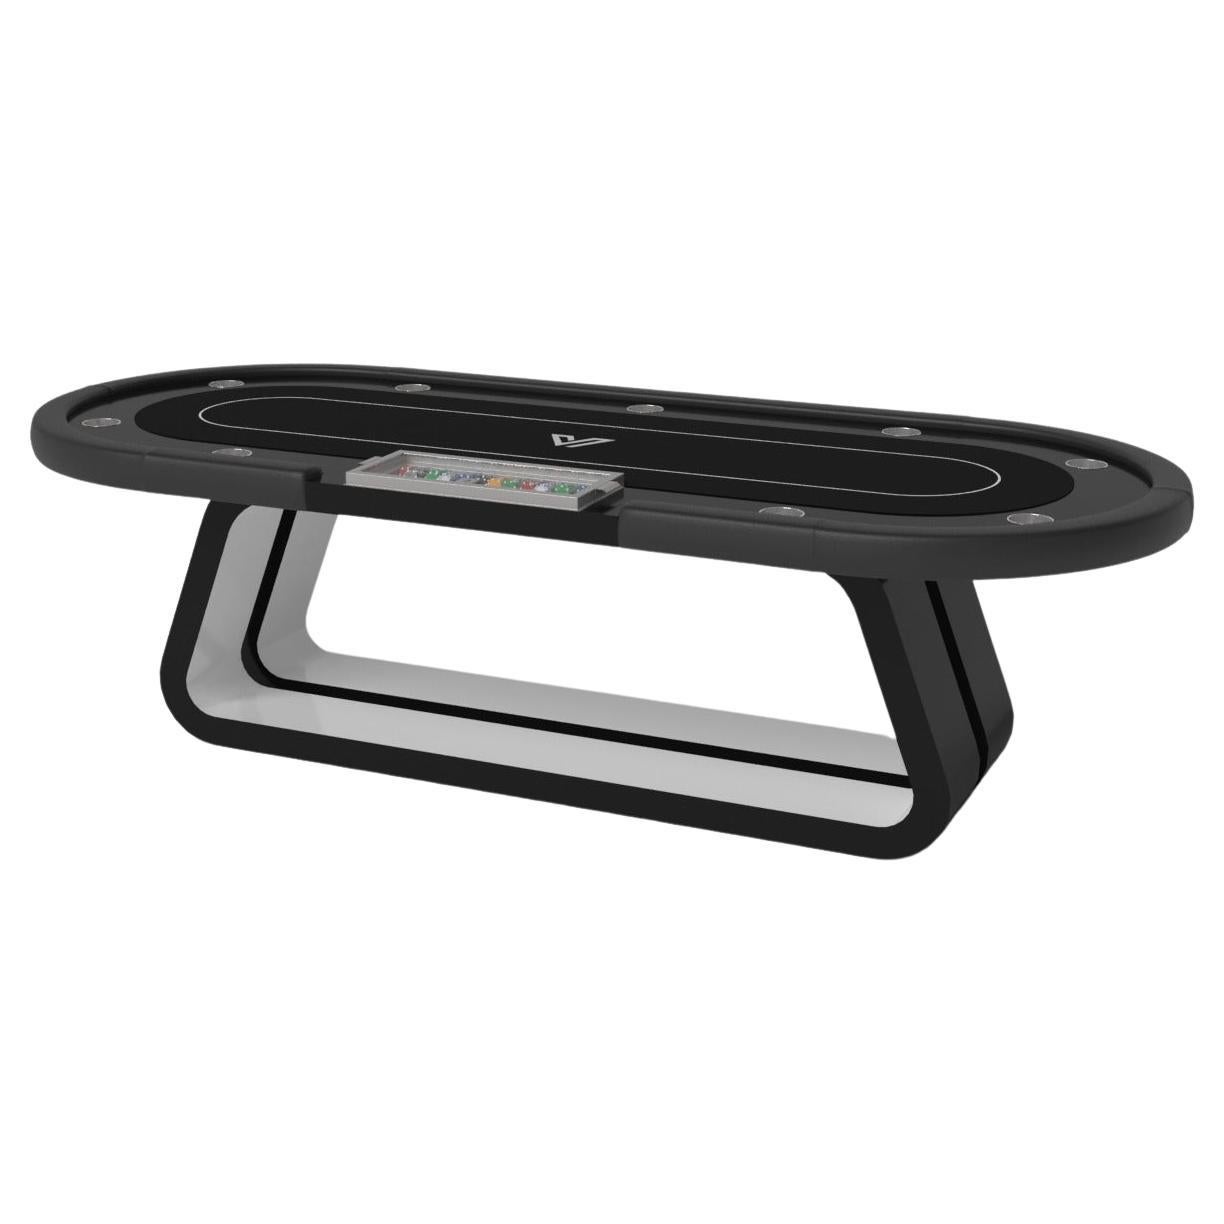 Elevate Customs Luge Poker Tables/Solid Pantone Black Color in 8'8" -Made in USA For Sale